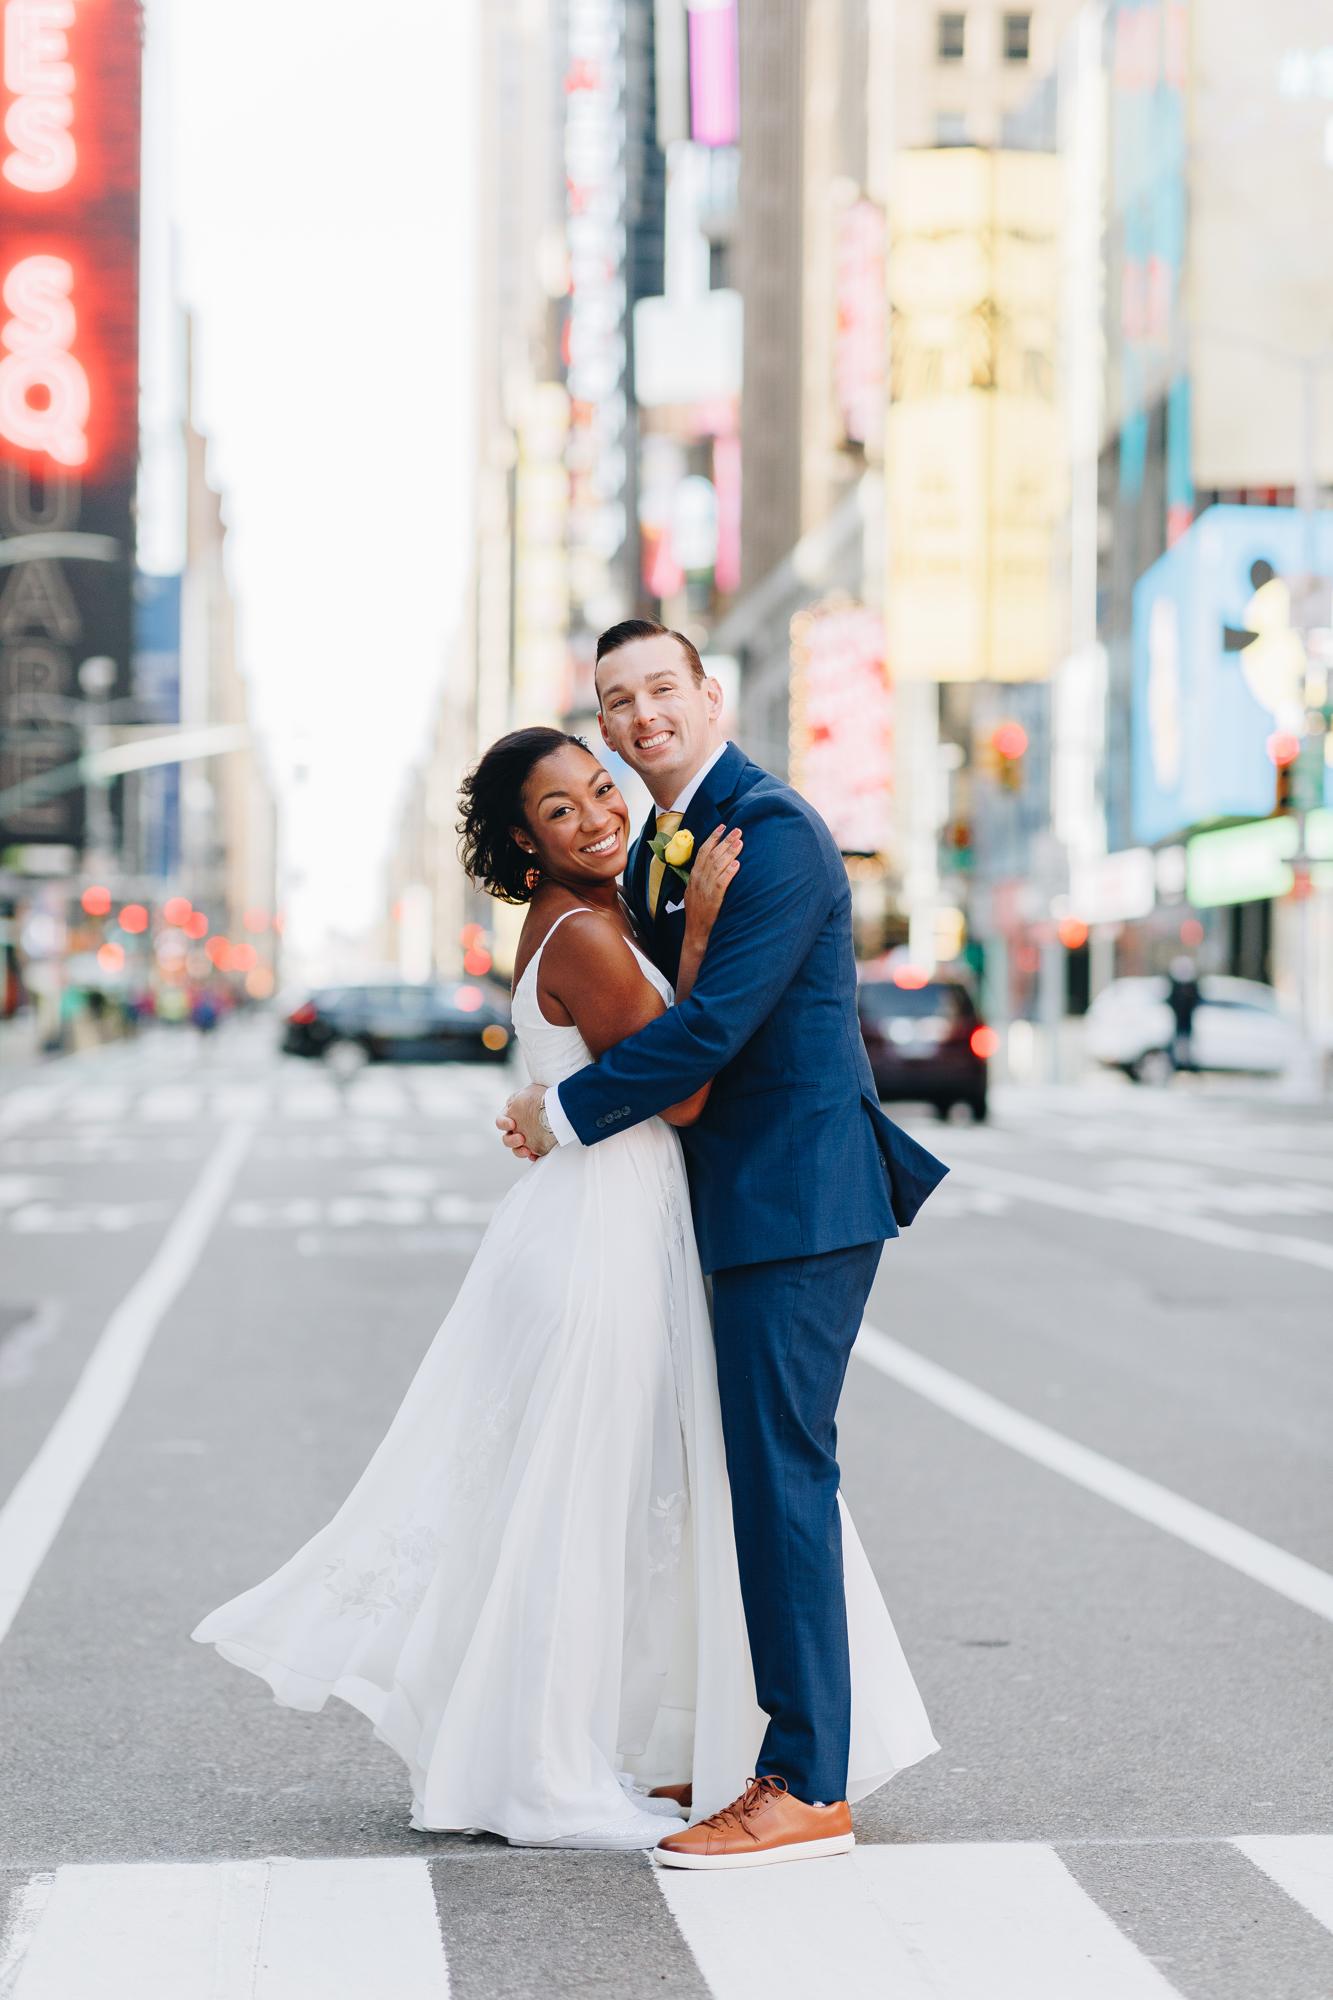 Posed Times Square Wedding Photos in New York